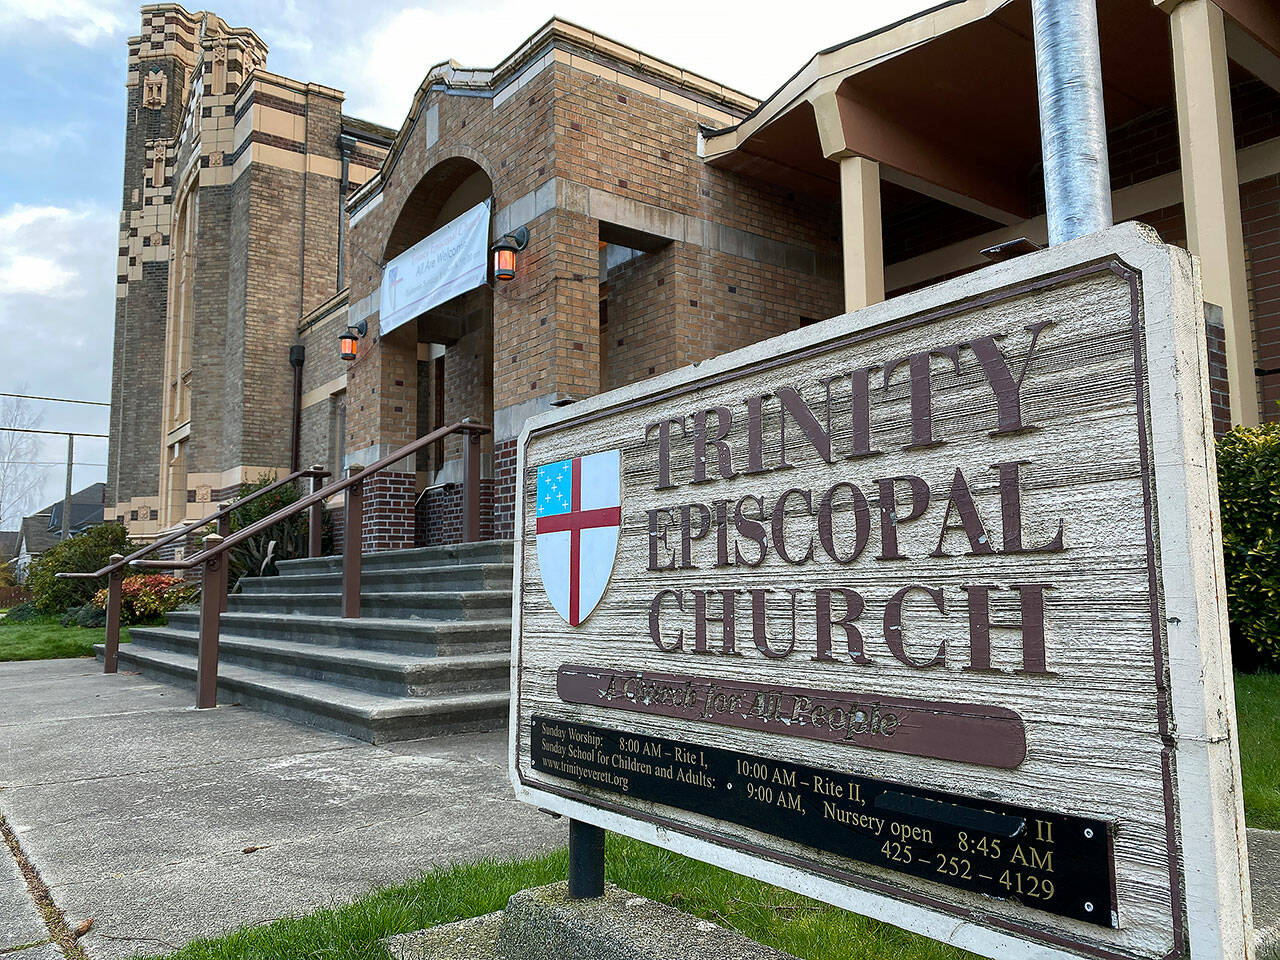 Trinity Episcopal Church in Everett is hosting a concert Sunday, Sept. 11 to raise money for restoring its 1973 pipe organ. (Sue Misao / Herald file)